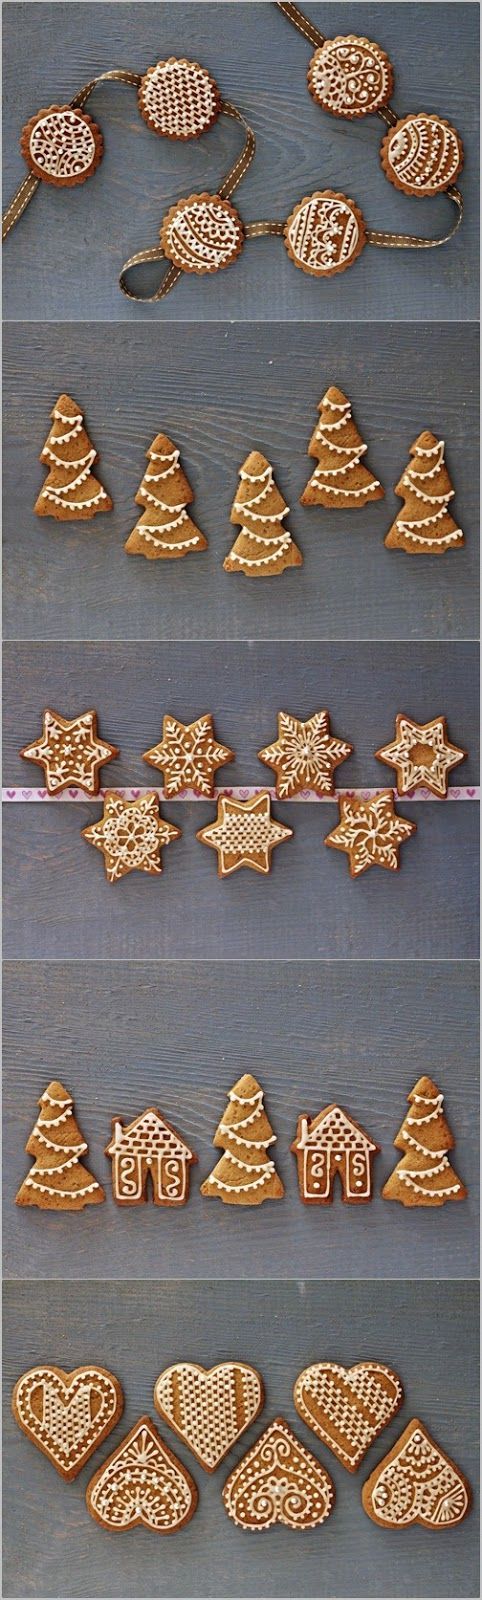 My Diverse Kitchen: Festive & Decorated Gingerbread Cookies